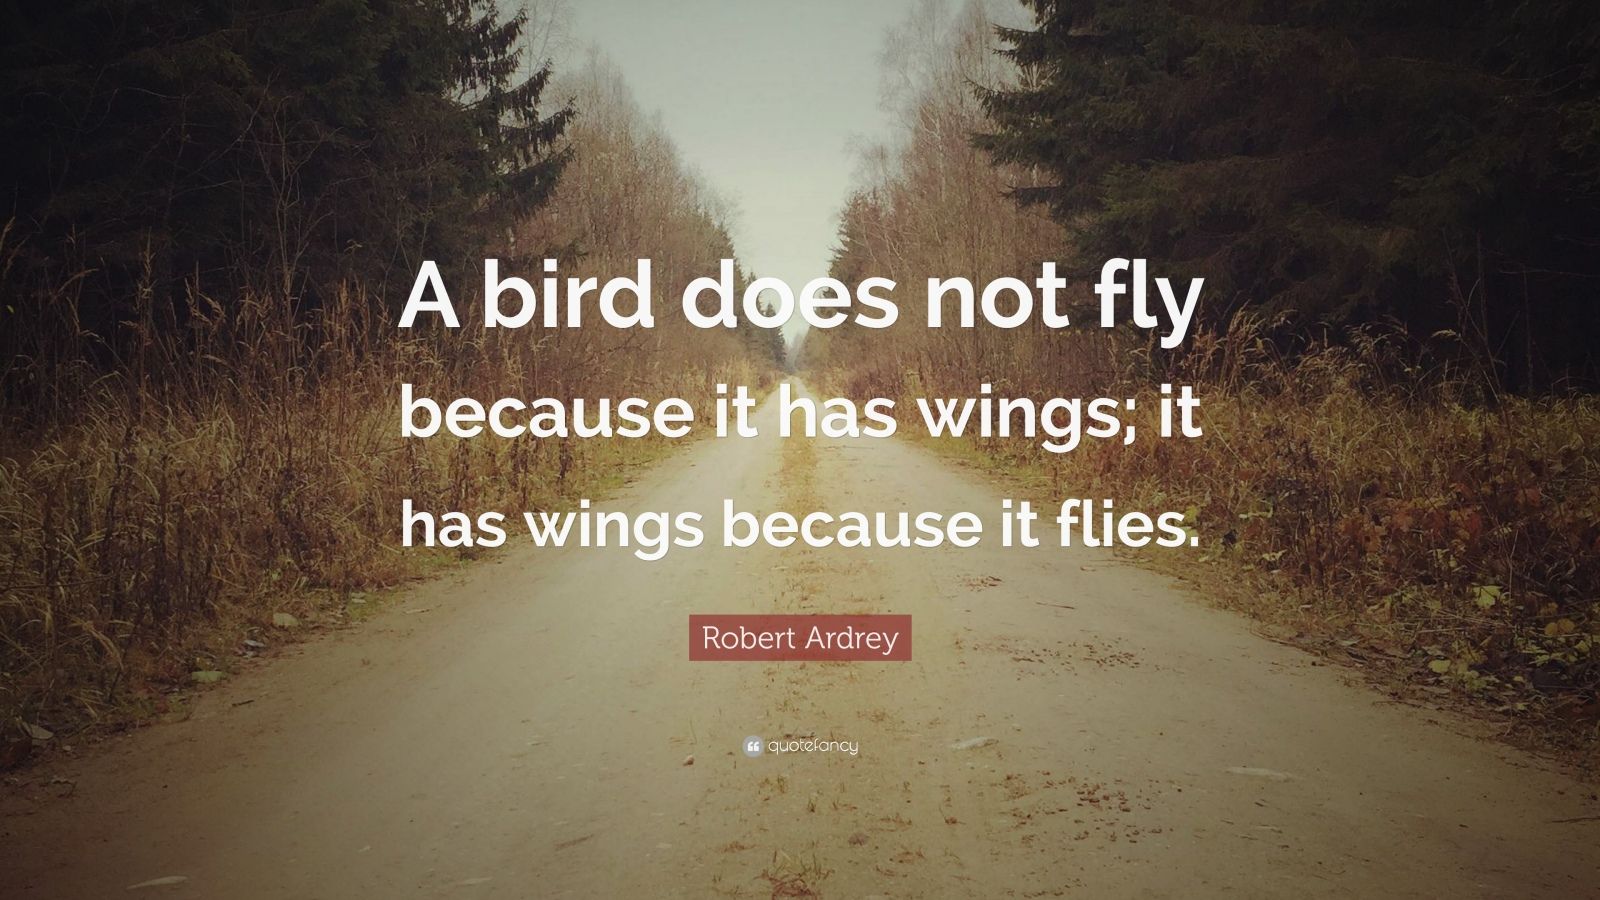 Robert Ardrey Quote: “A bird does not fly because it has wings; it has ...